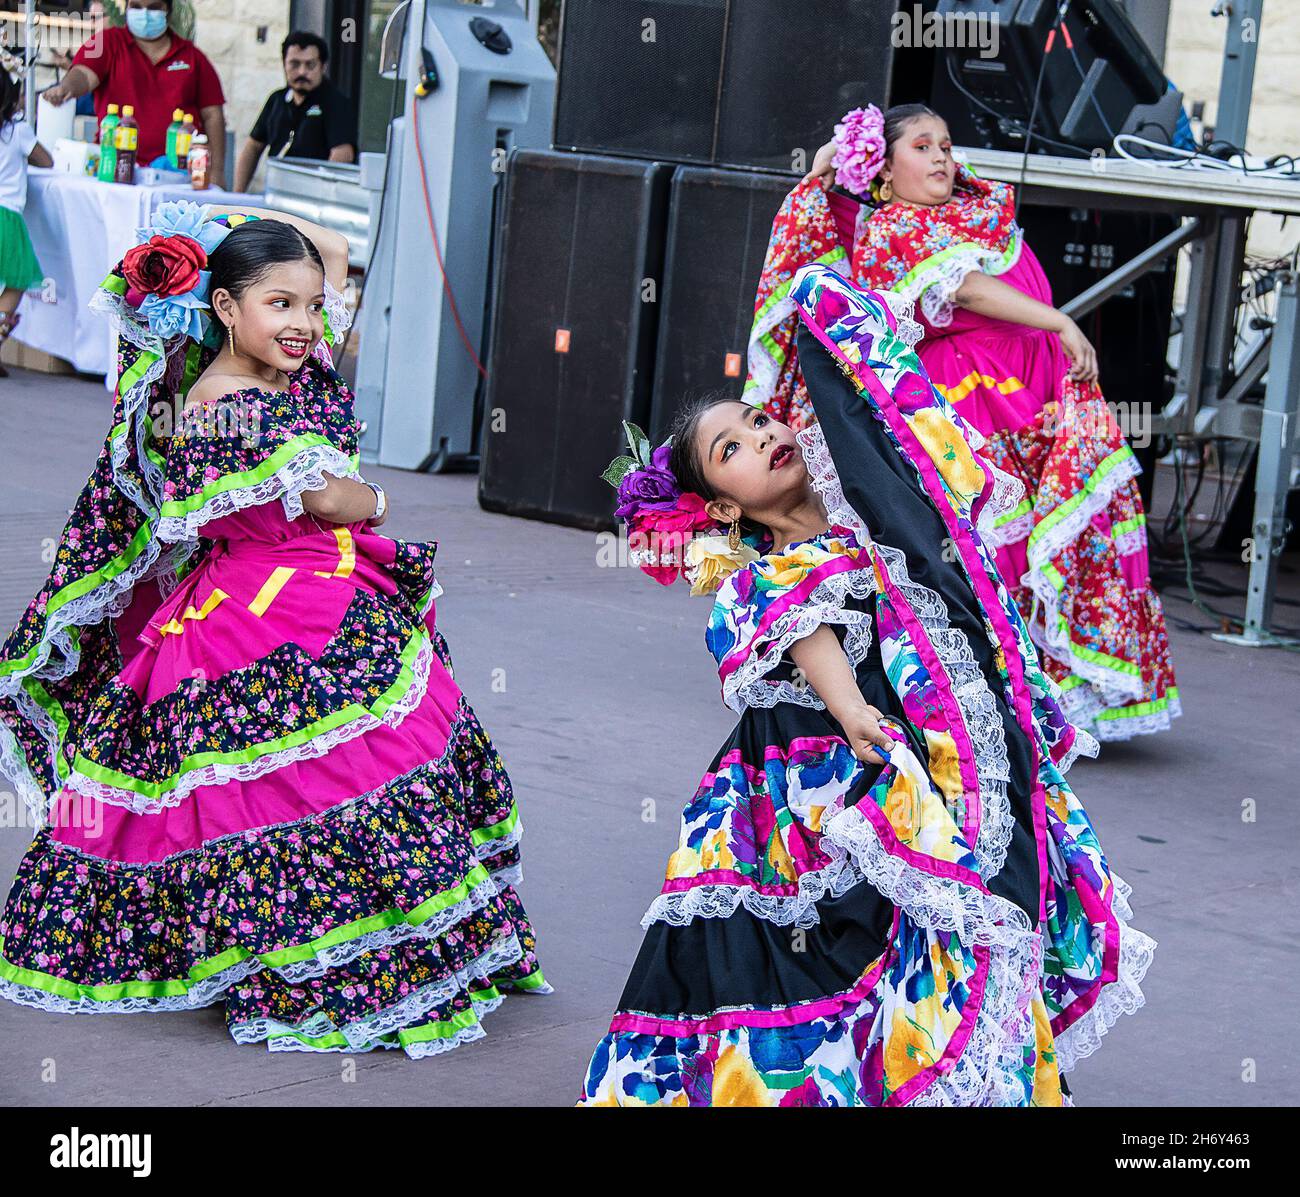 2021 19 09 Tulsa USA - Beautiful young Hispanic girls dance at street festival in beautiful colorful dresses with flowers in their hair in font of sta Stock Photo